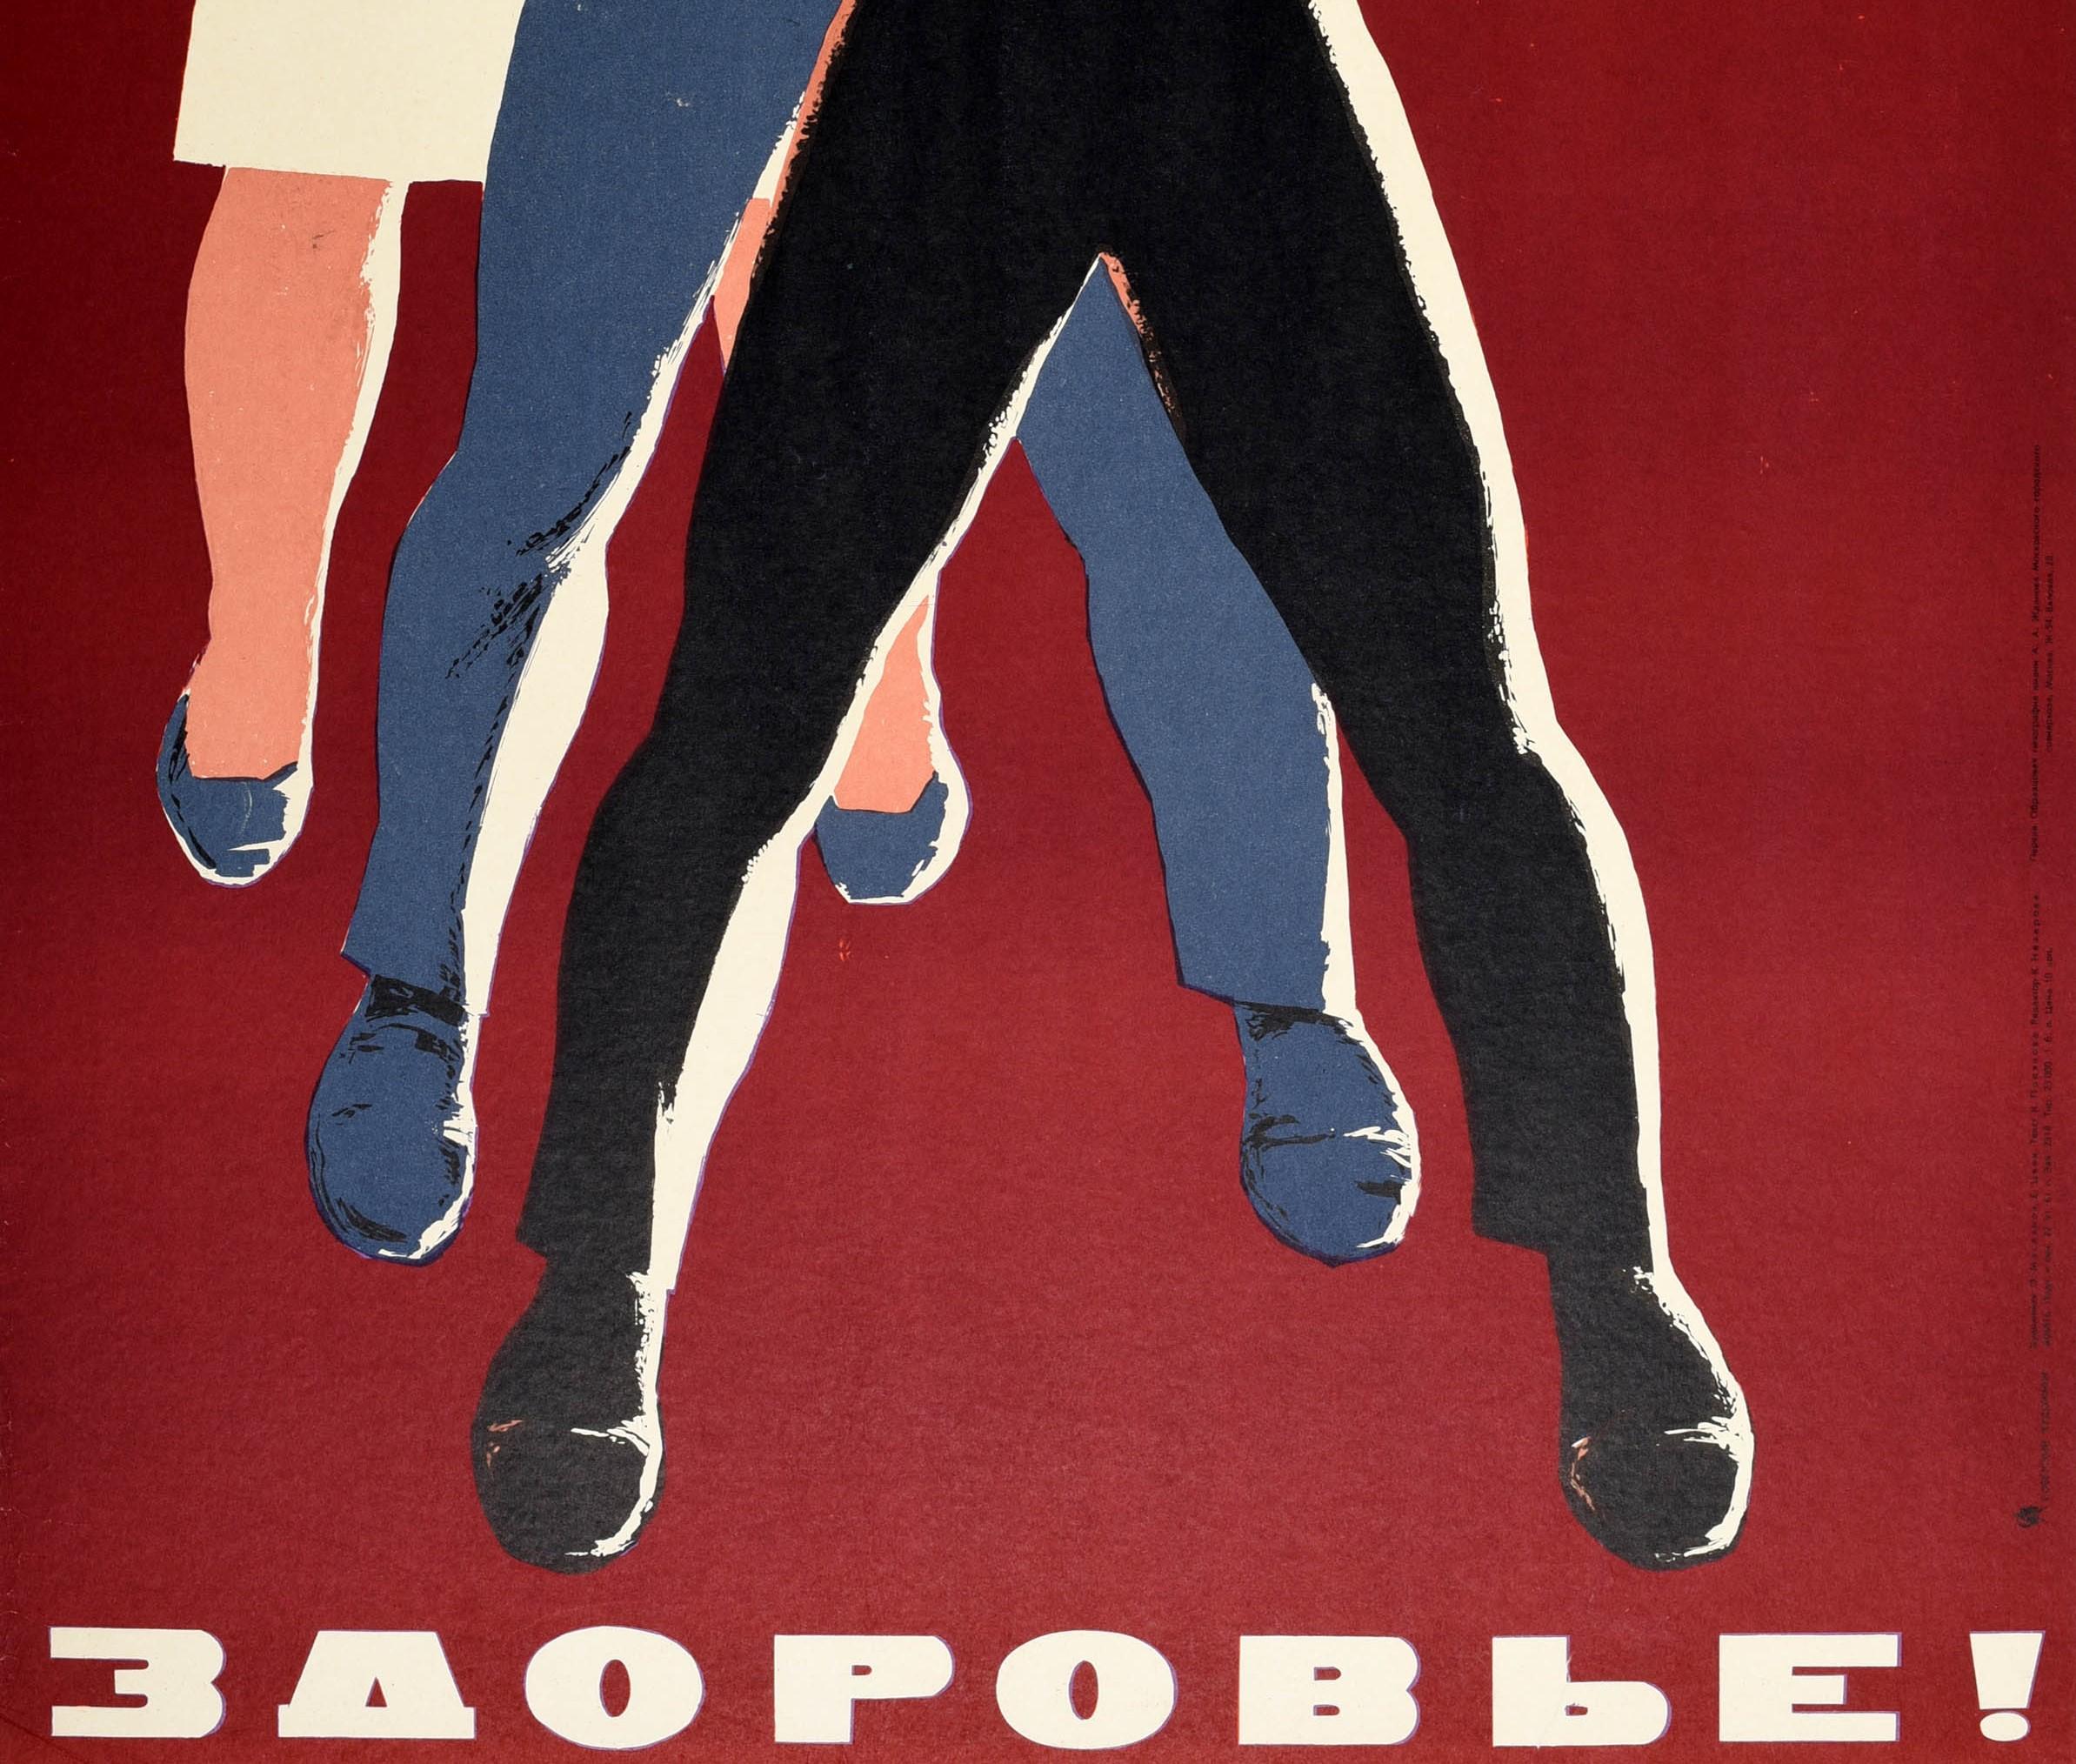 vintage exercise posters